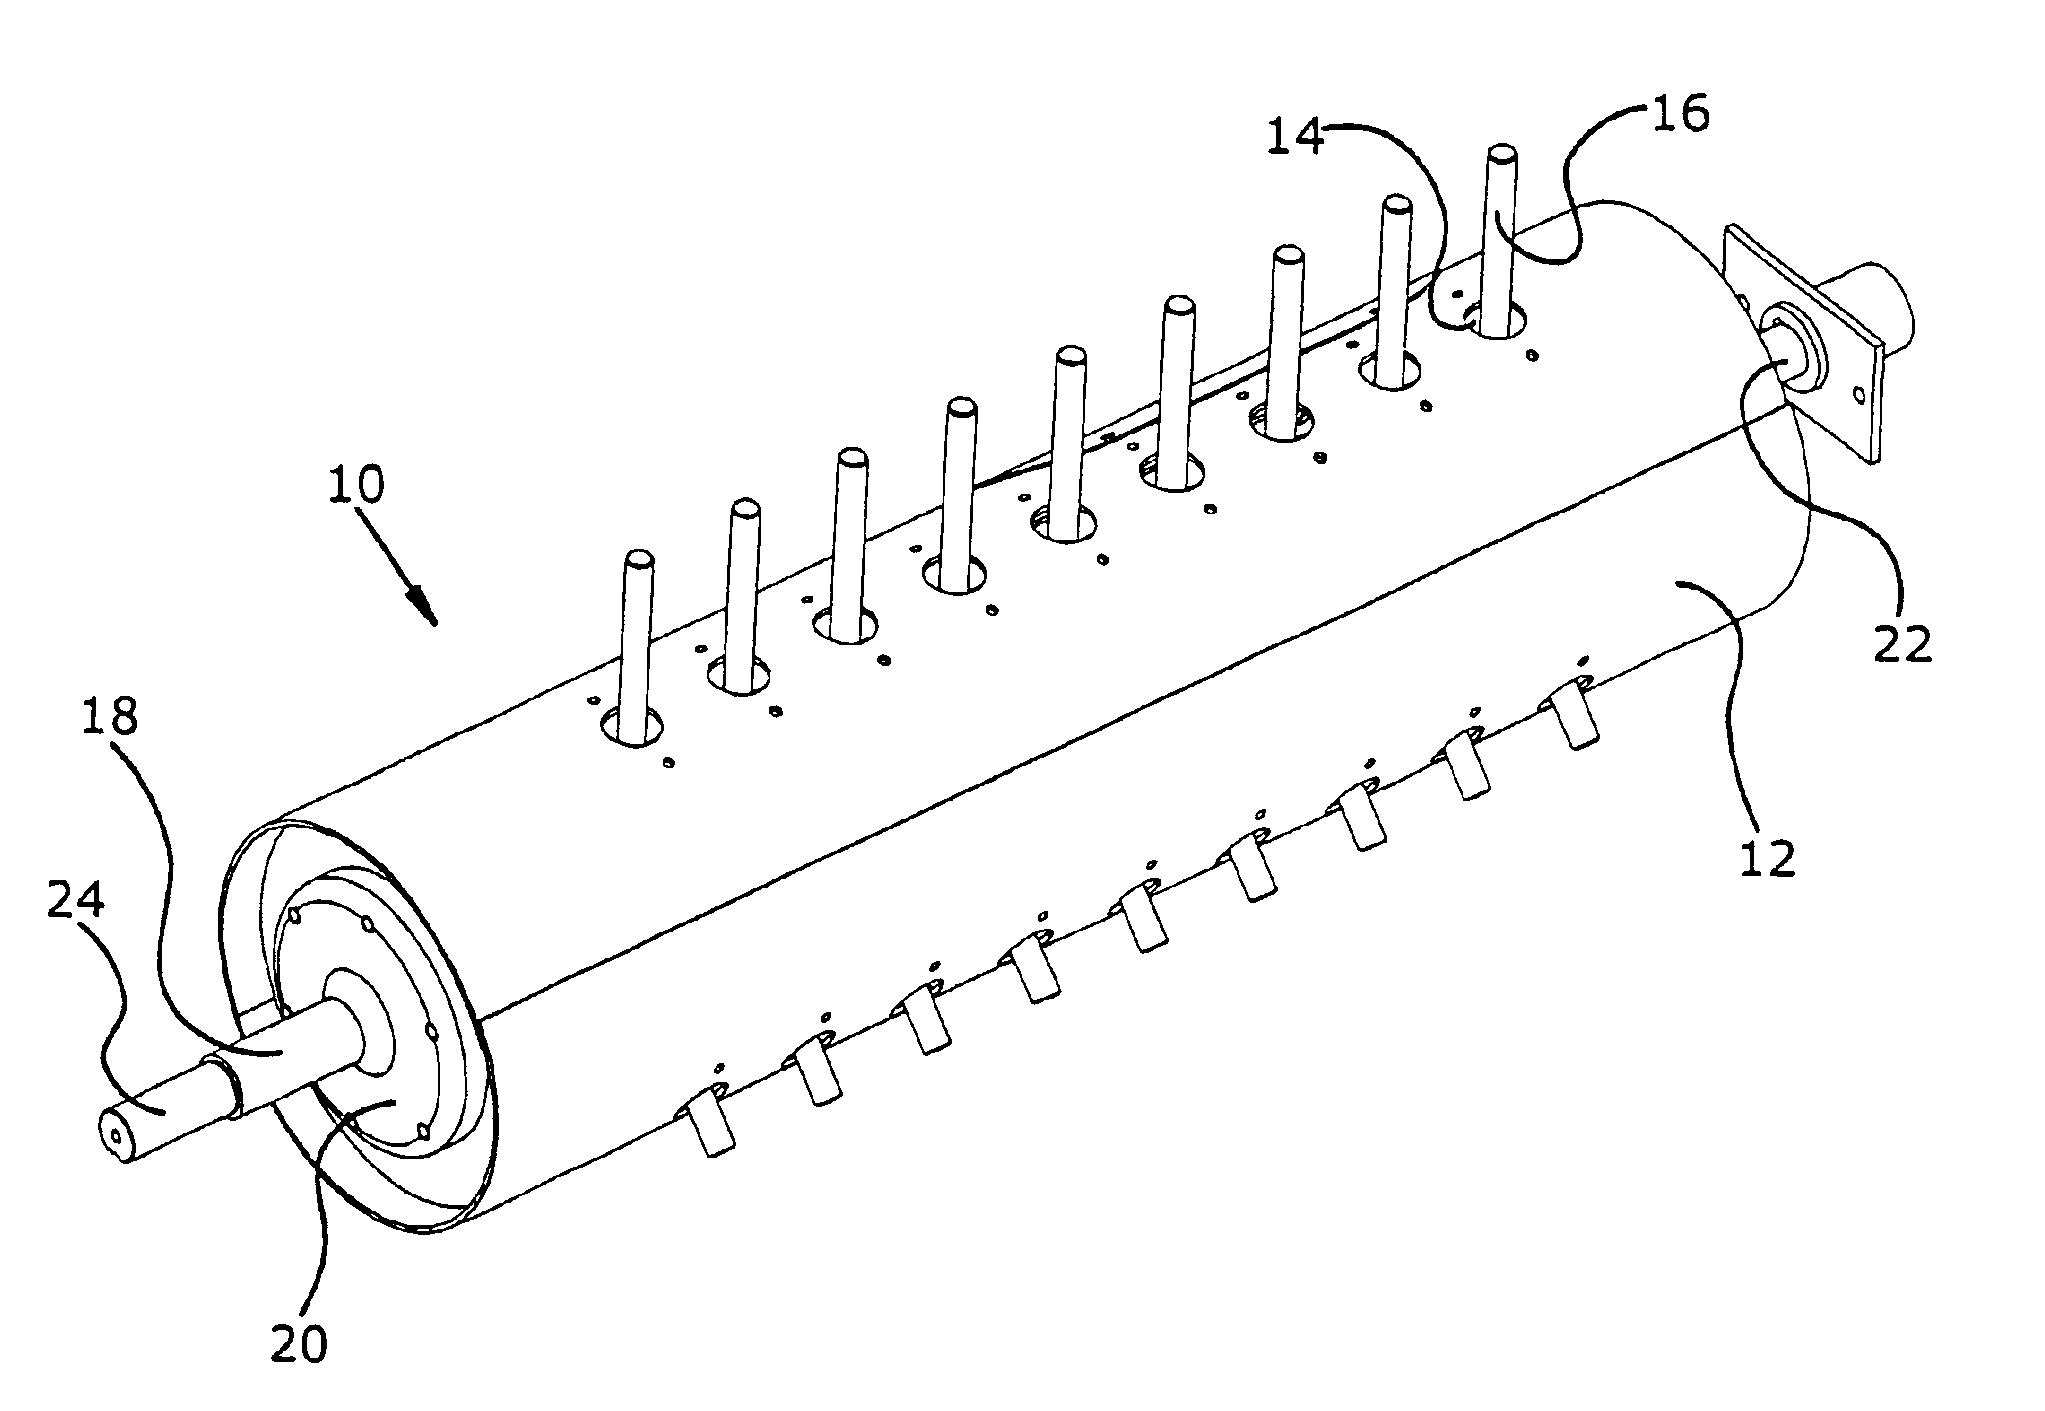 Rotary conveyor with fingers